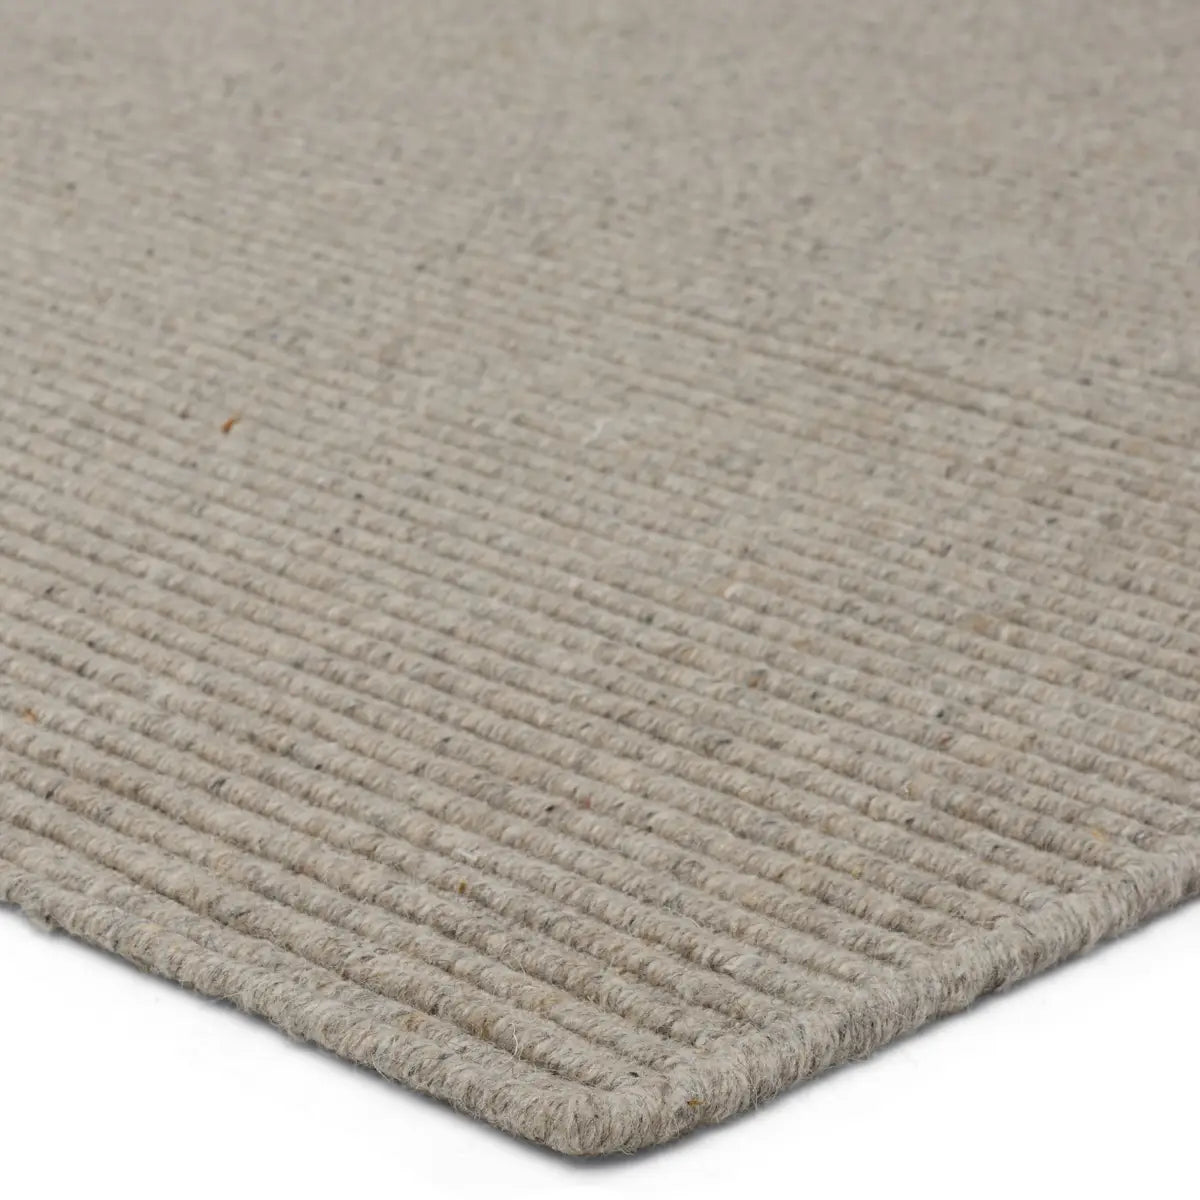 The Strada Shyre Morn Rug features a unique texture and casual comfort that effortlessly grounds spaces with a solid hue. This handwoven wool rug is crafted from undyed yarn for a distinctive, neutral colorway with natural variation for a bit of dimension. Amethyst Home provides interior design services, furniture, rugs, and lighting in the Seattle metro area.